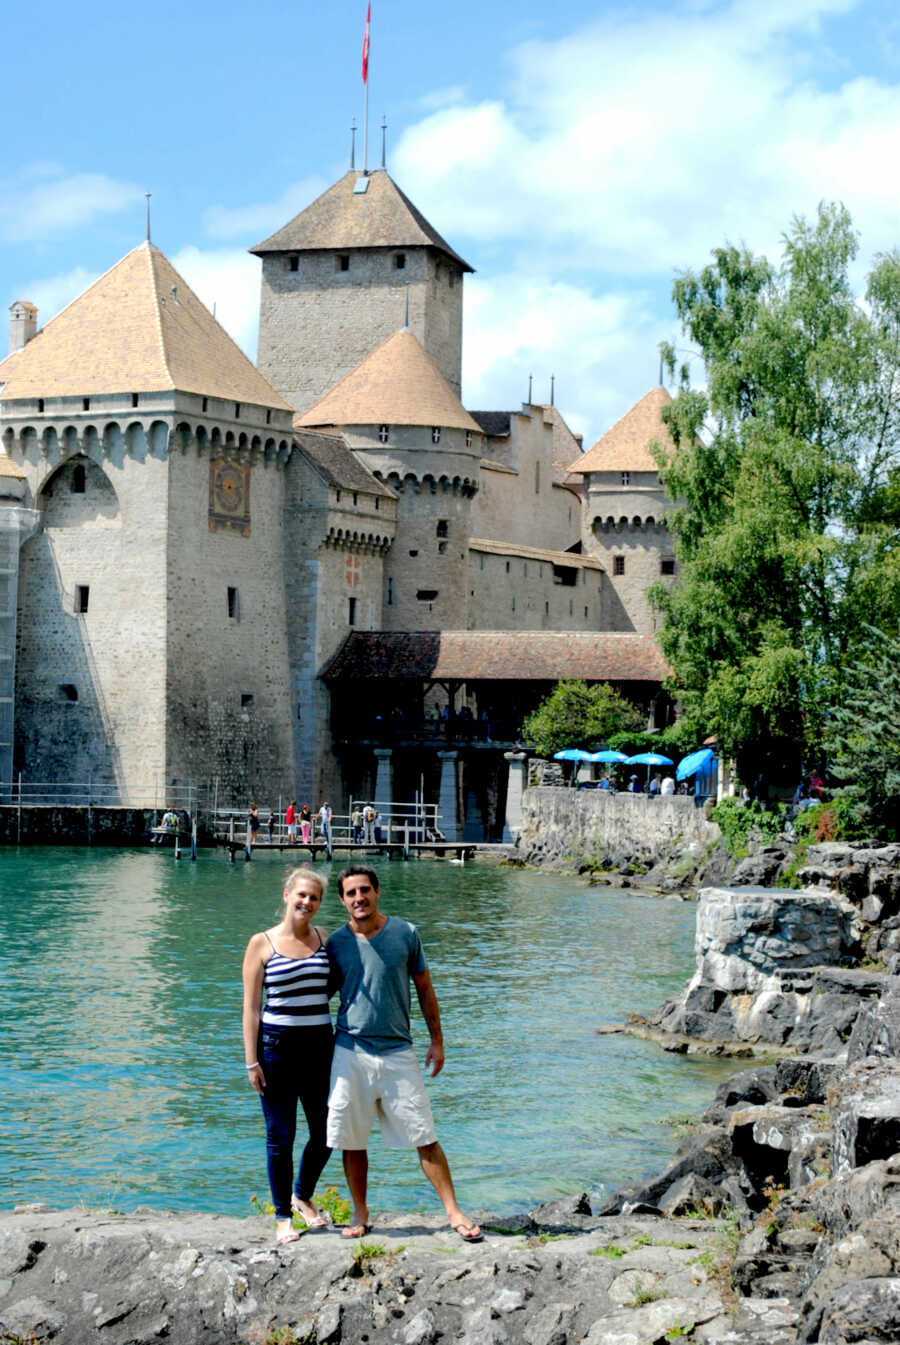 husband and wife pose together in front of a castle